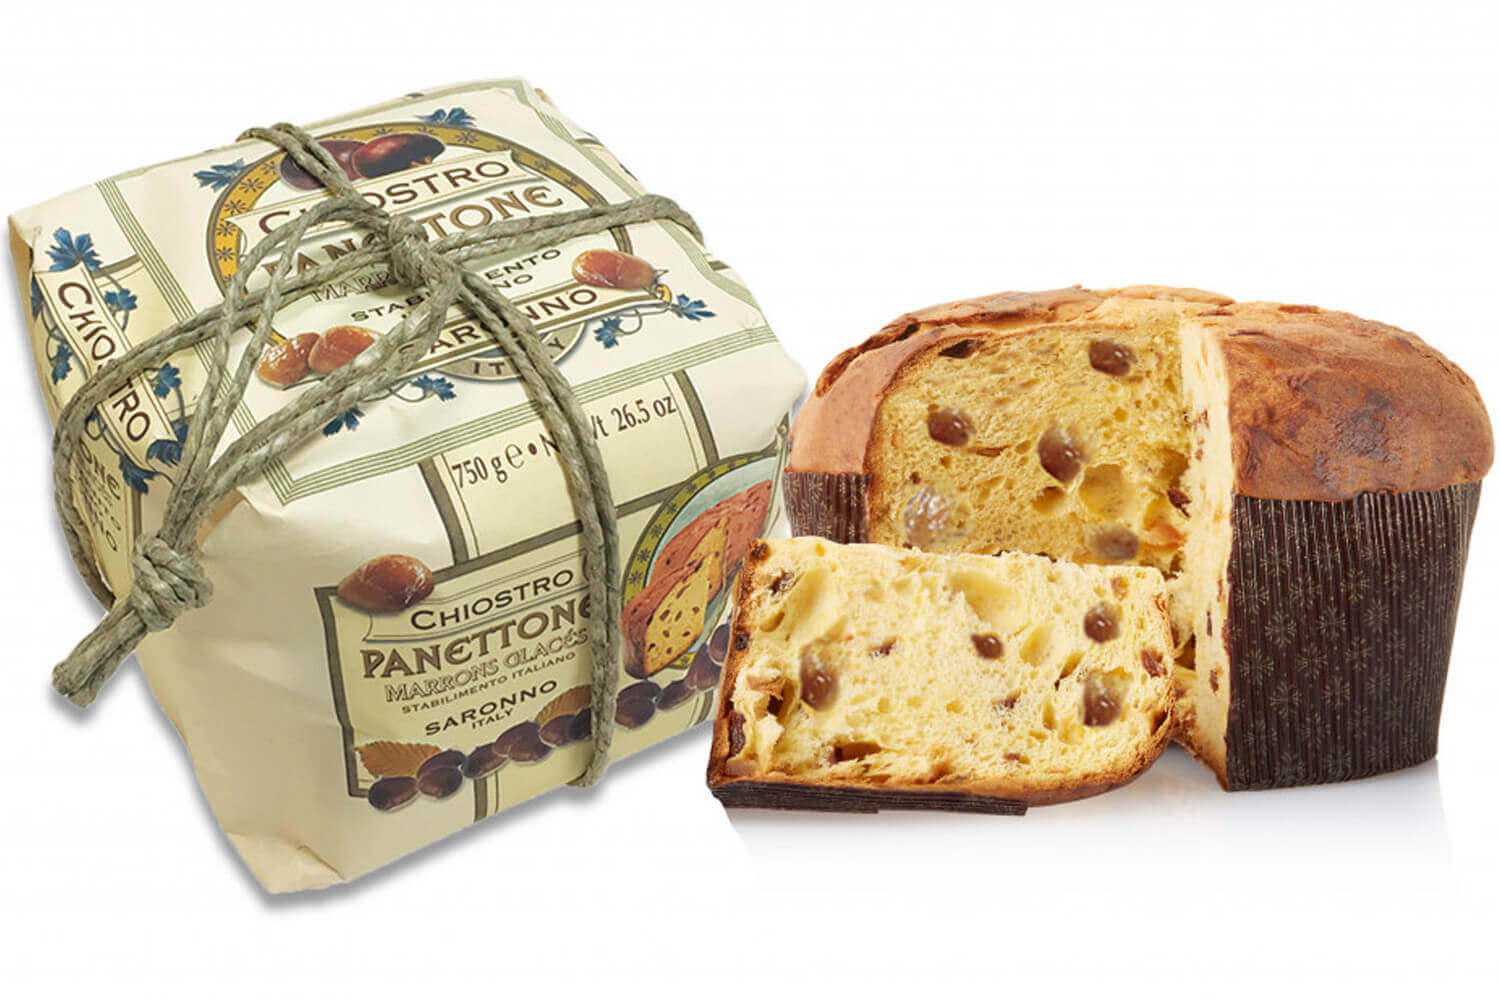 https://cdn.couteaux-du-chef.fr/81018/panettone-chiostro-di-saronno-marrons-glaces-750g-fabrication-italienne-artisanale.jpg